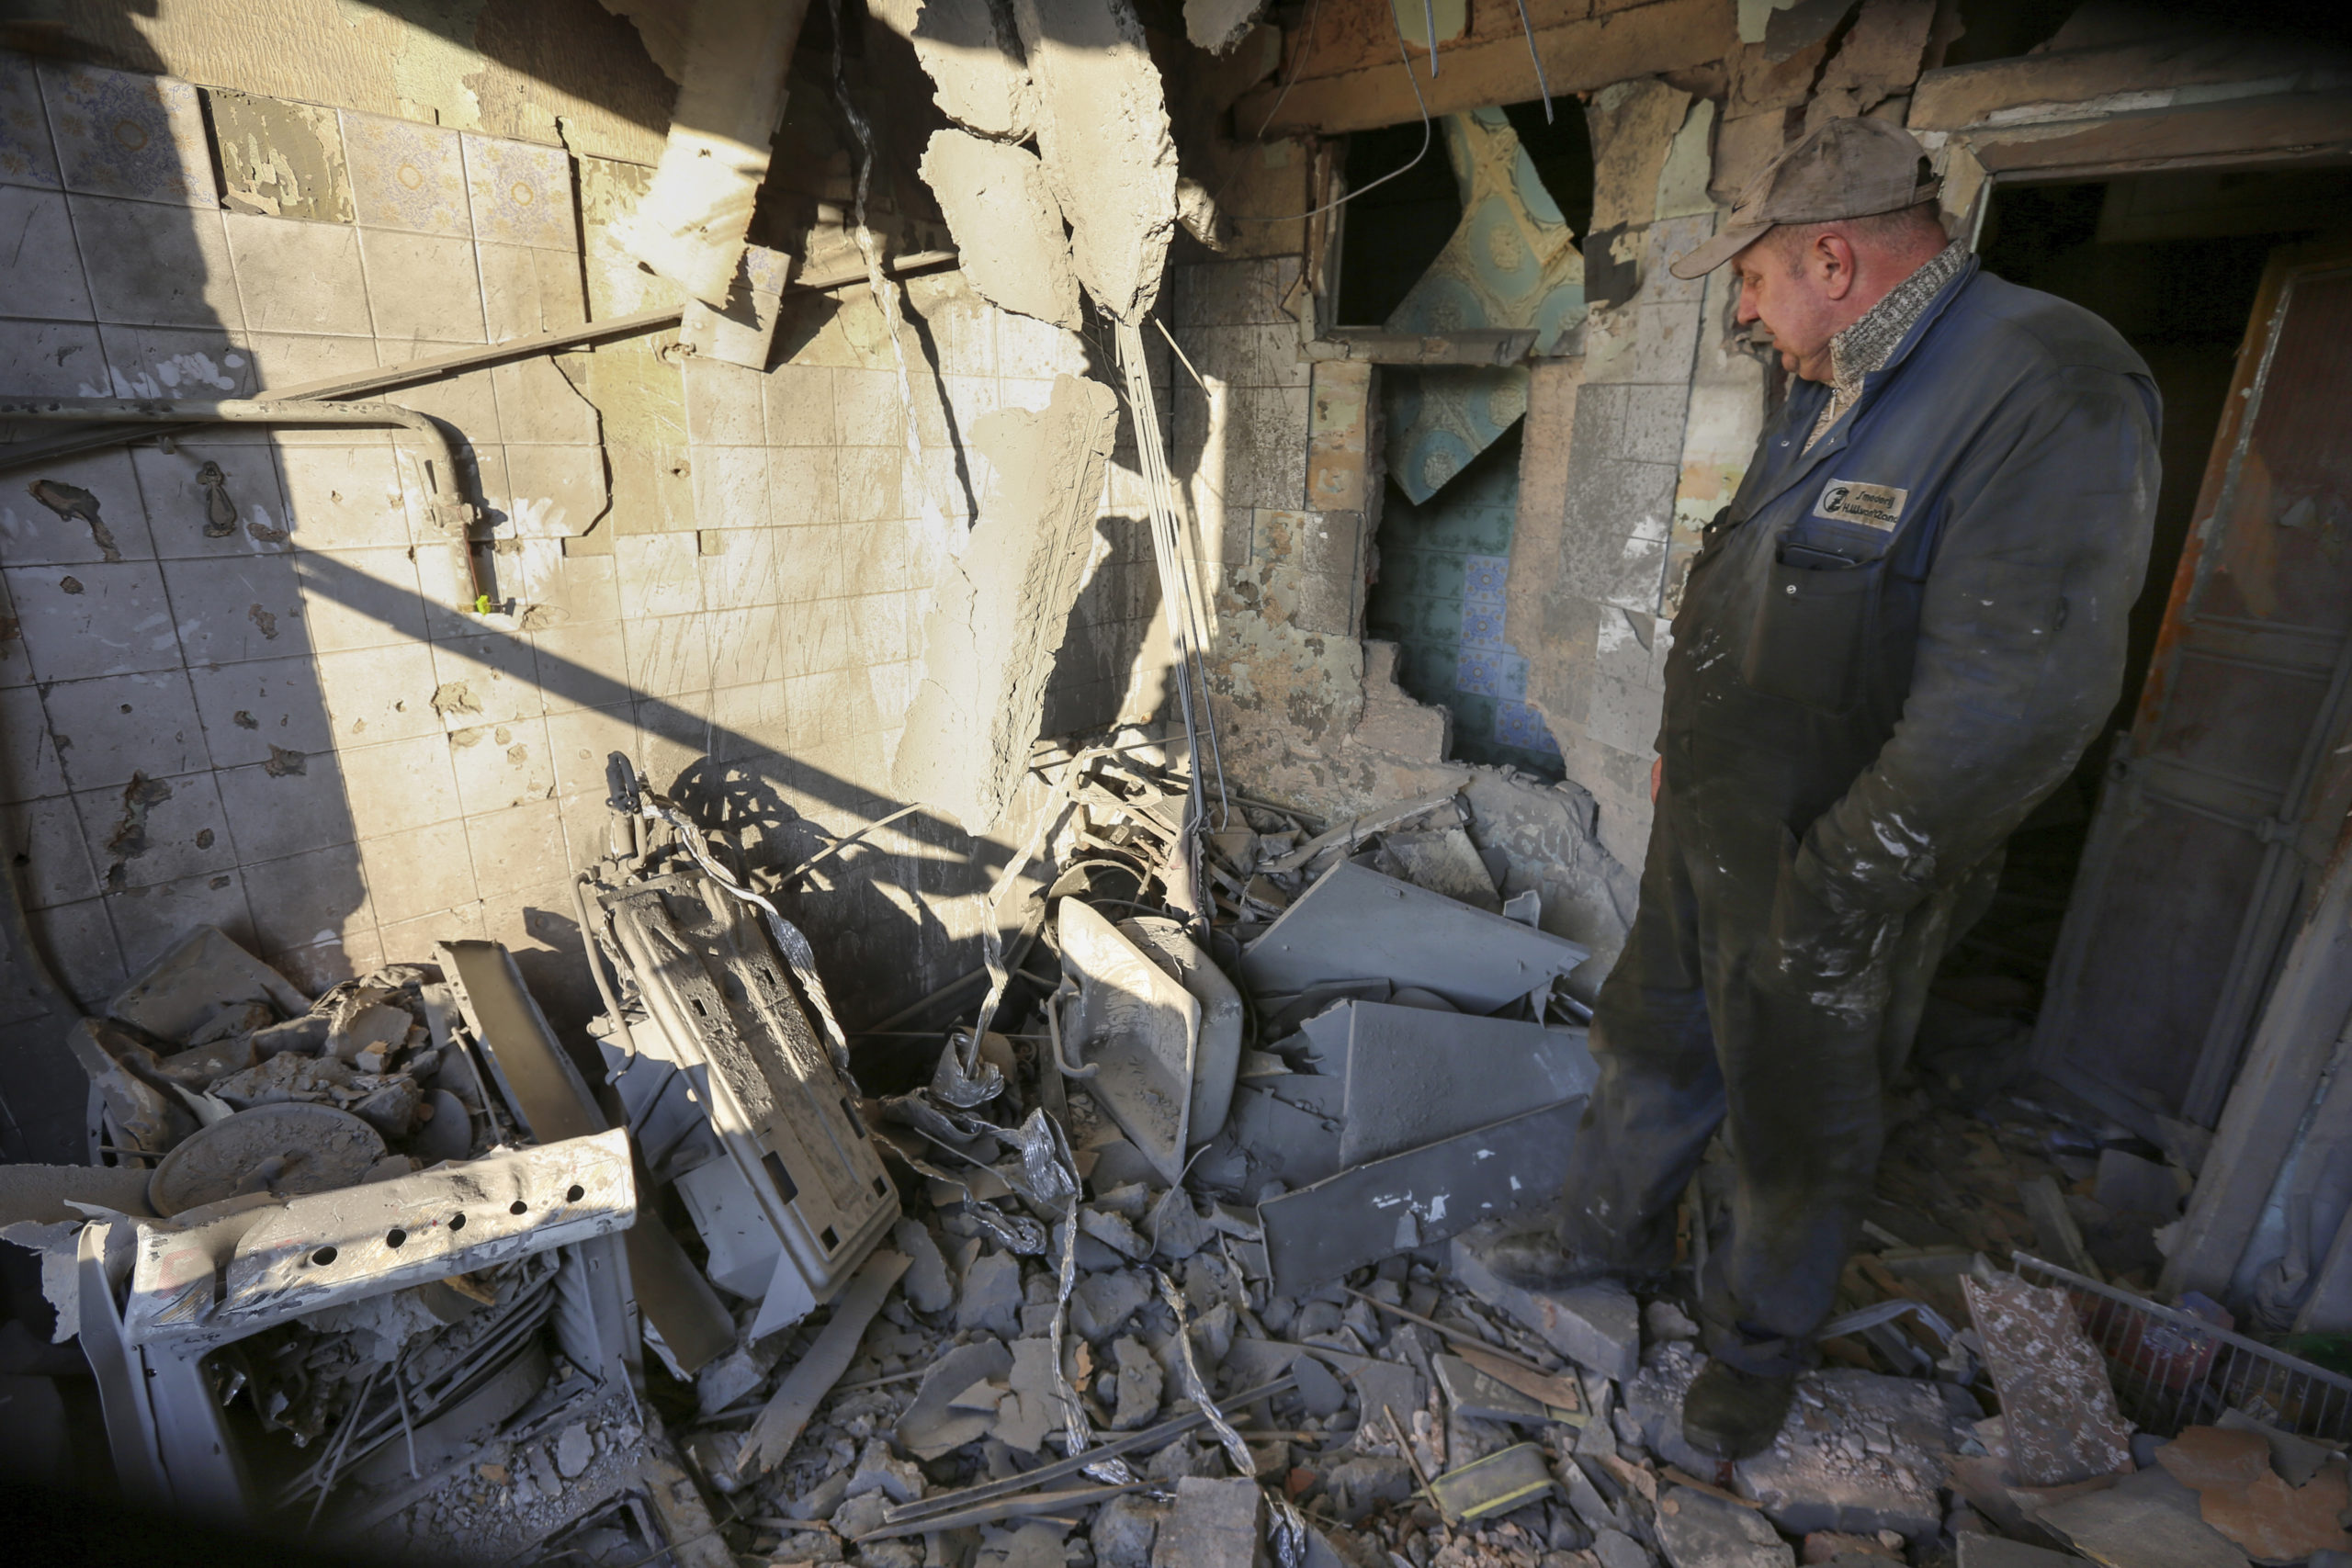 A man examines a damaged apartment building Thursday after what Russian officials said was a shelling by Ukrainian forces in the capital of the Russian-controlled Donetsk region in eastern Ukraine.